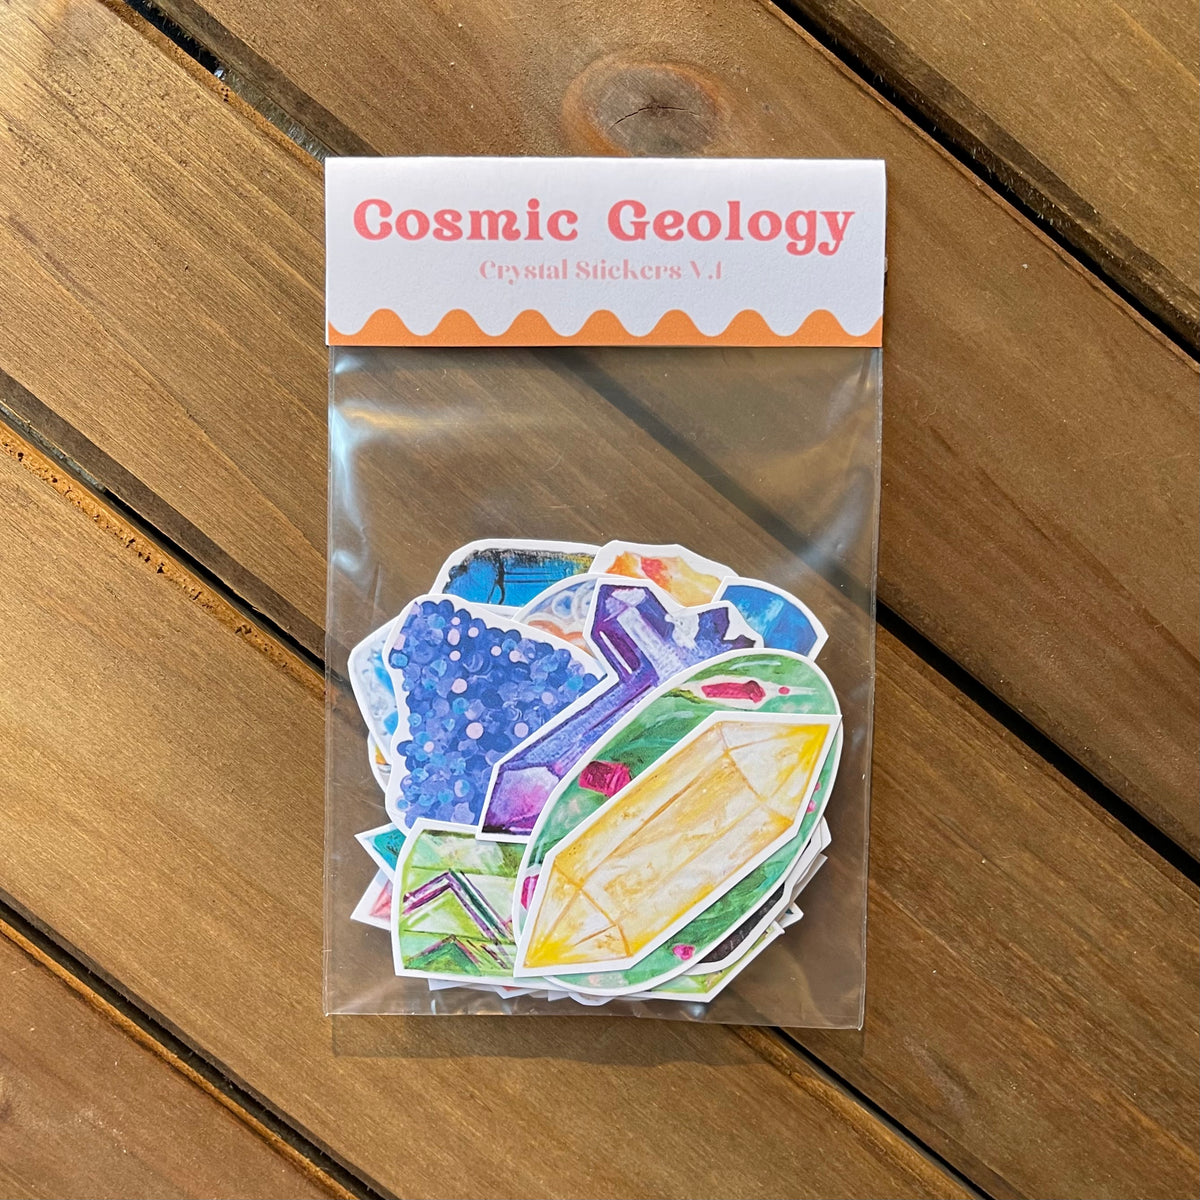 Mini Crystal Stickers Pack Version 1 – Cosmic Geology Crystals